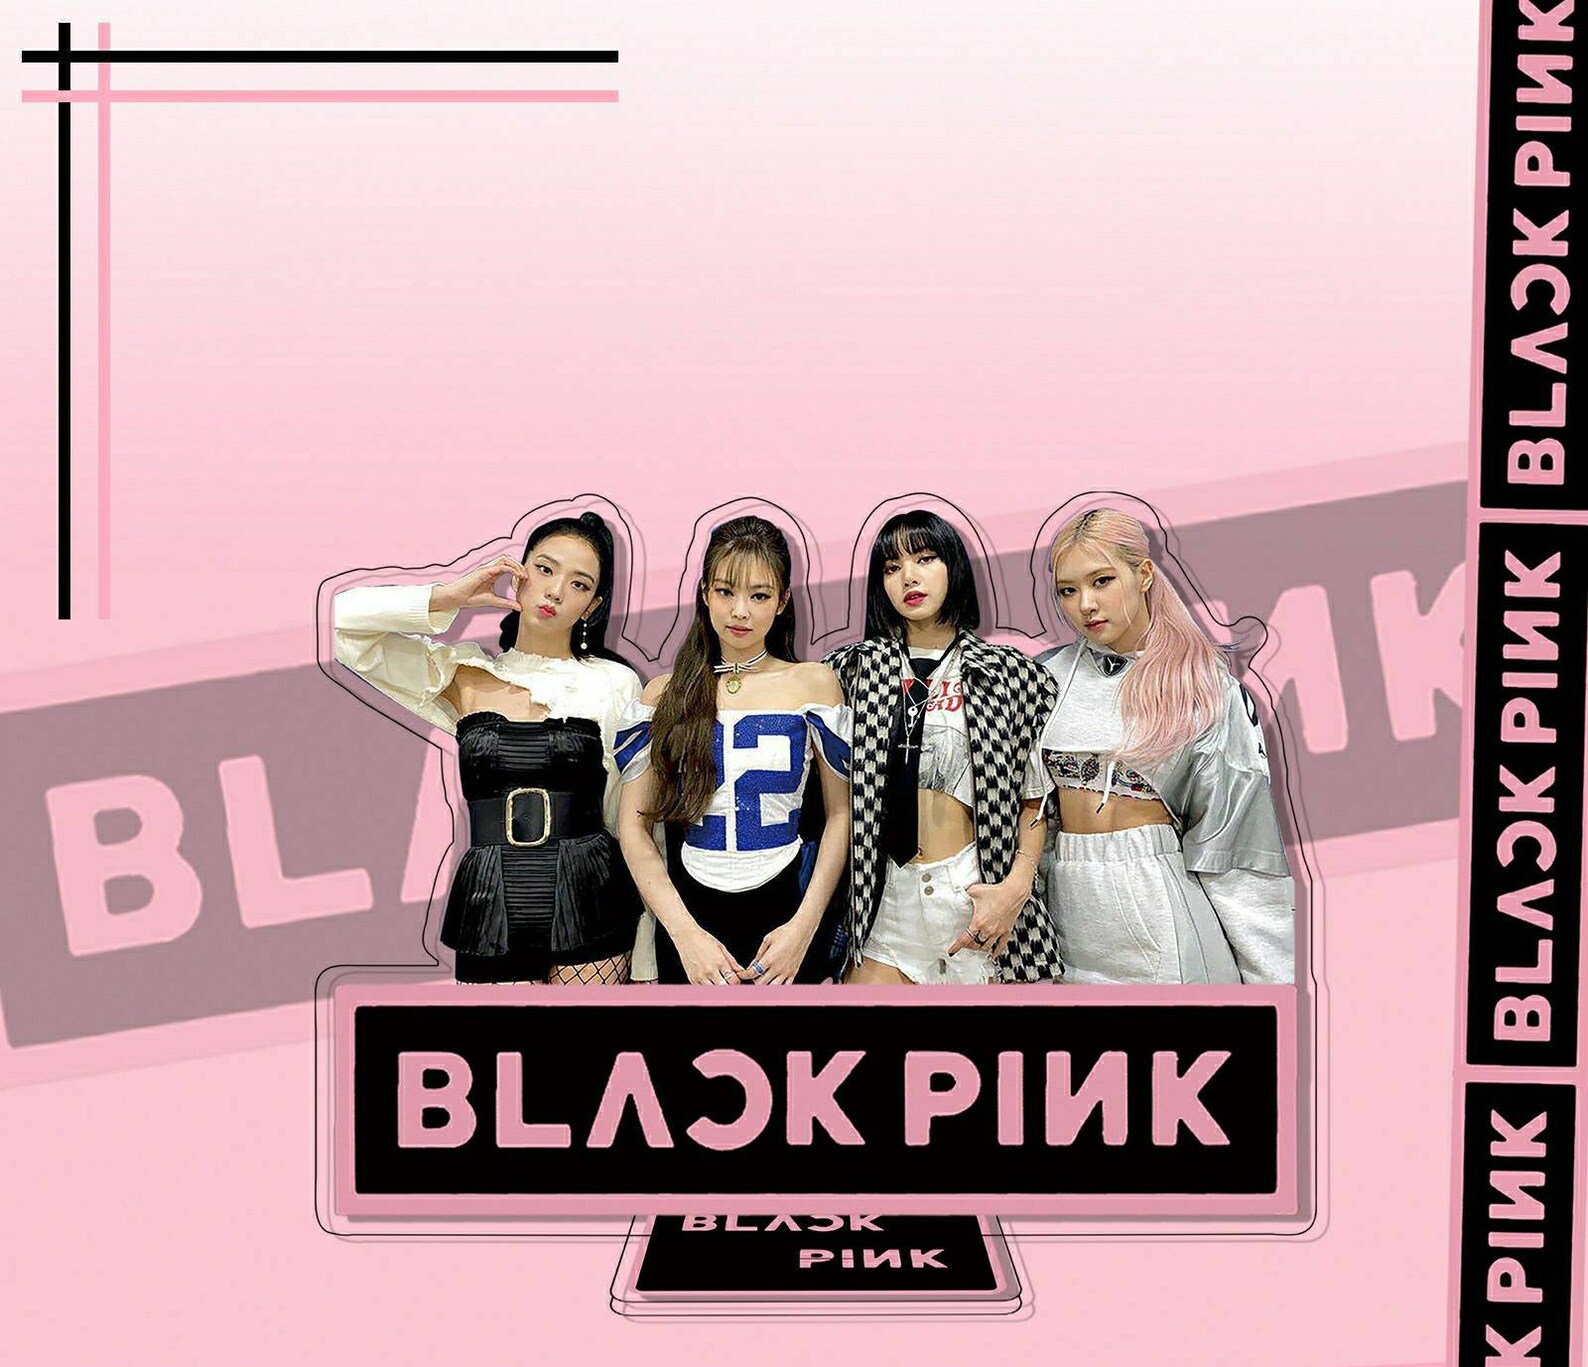 Blackpink group acrylic big size standee A | Etsy